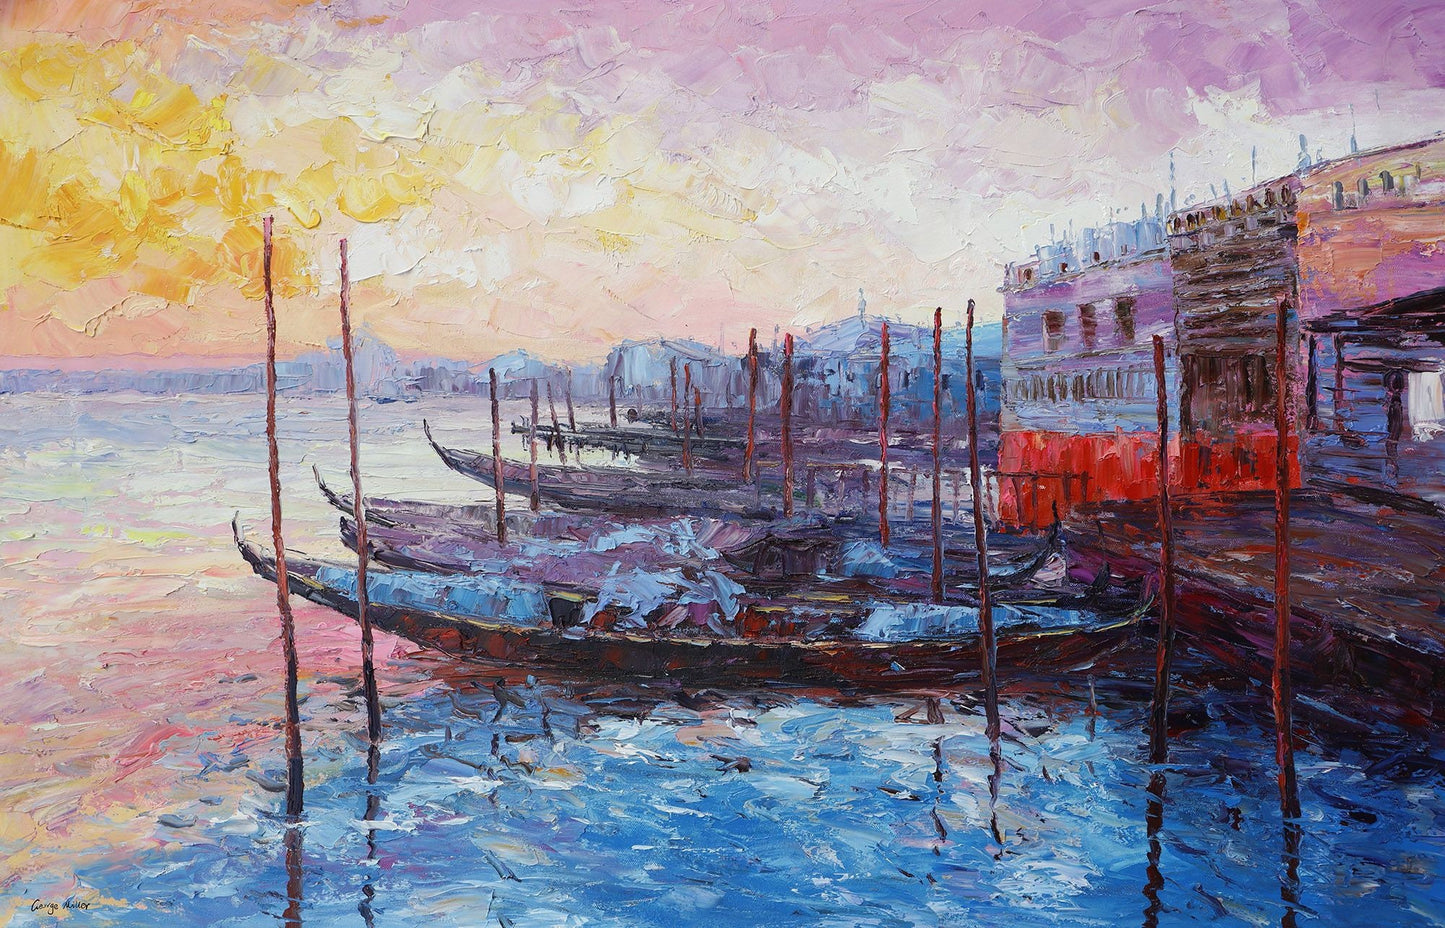 Extra Large Custom Oil Painting Venice at Dawn Gondola, Living Room Wall Decor, Large Wall Decor, Abstract Canvas Art, Contemporary Art